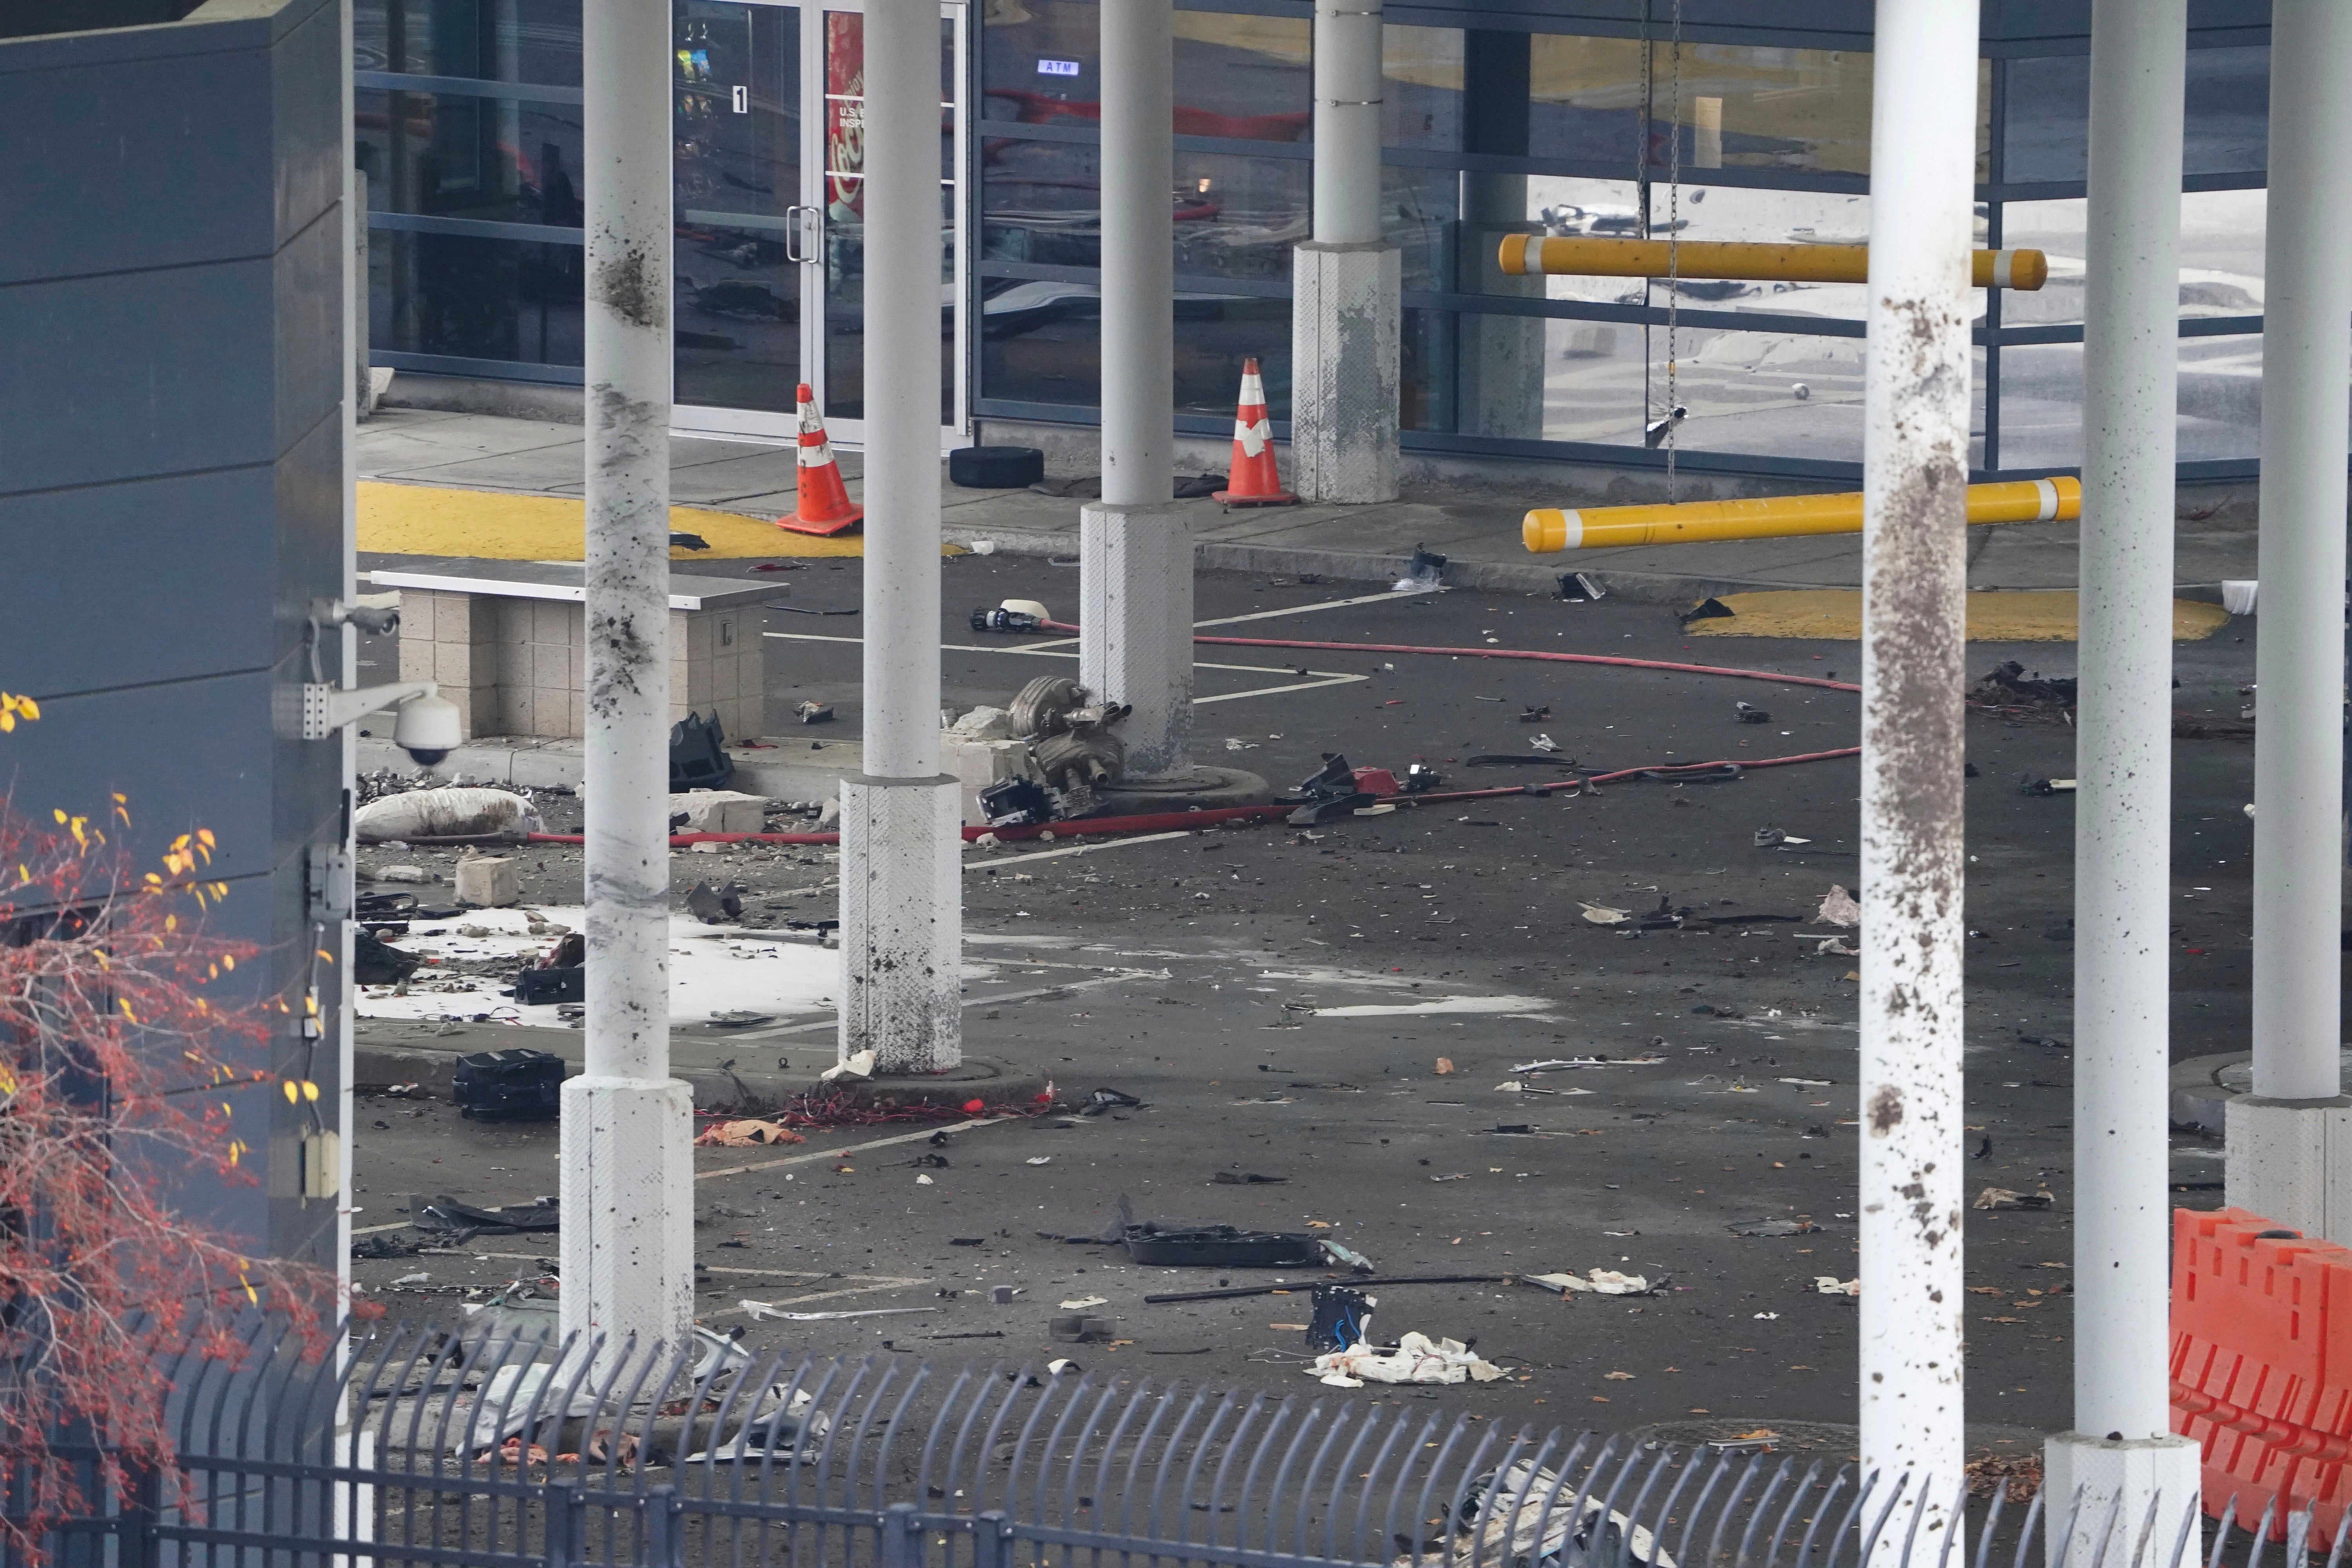 Debris is scattered about inside the customs plaza at the Rainbow Bridge border crossing